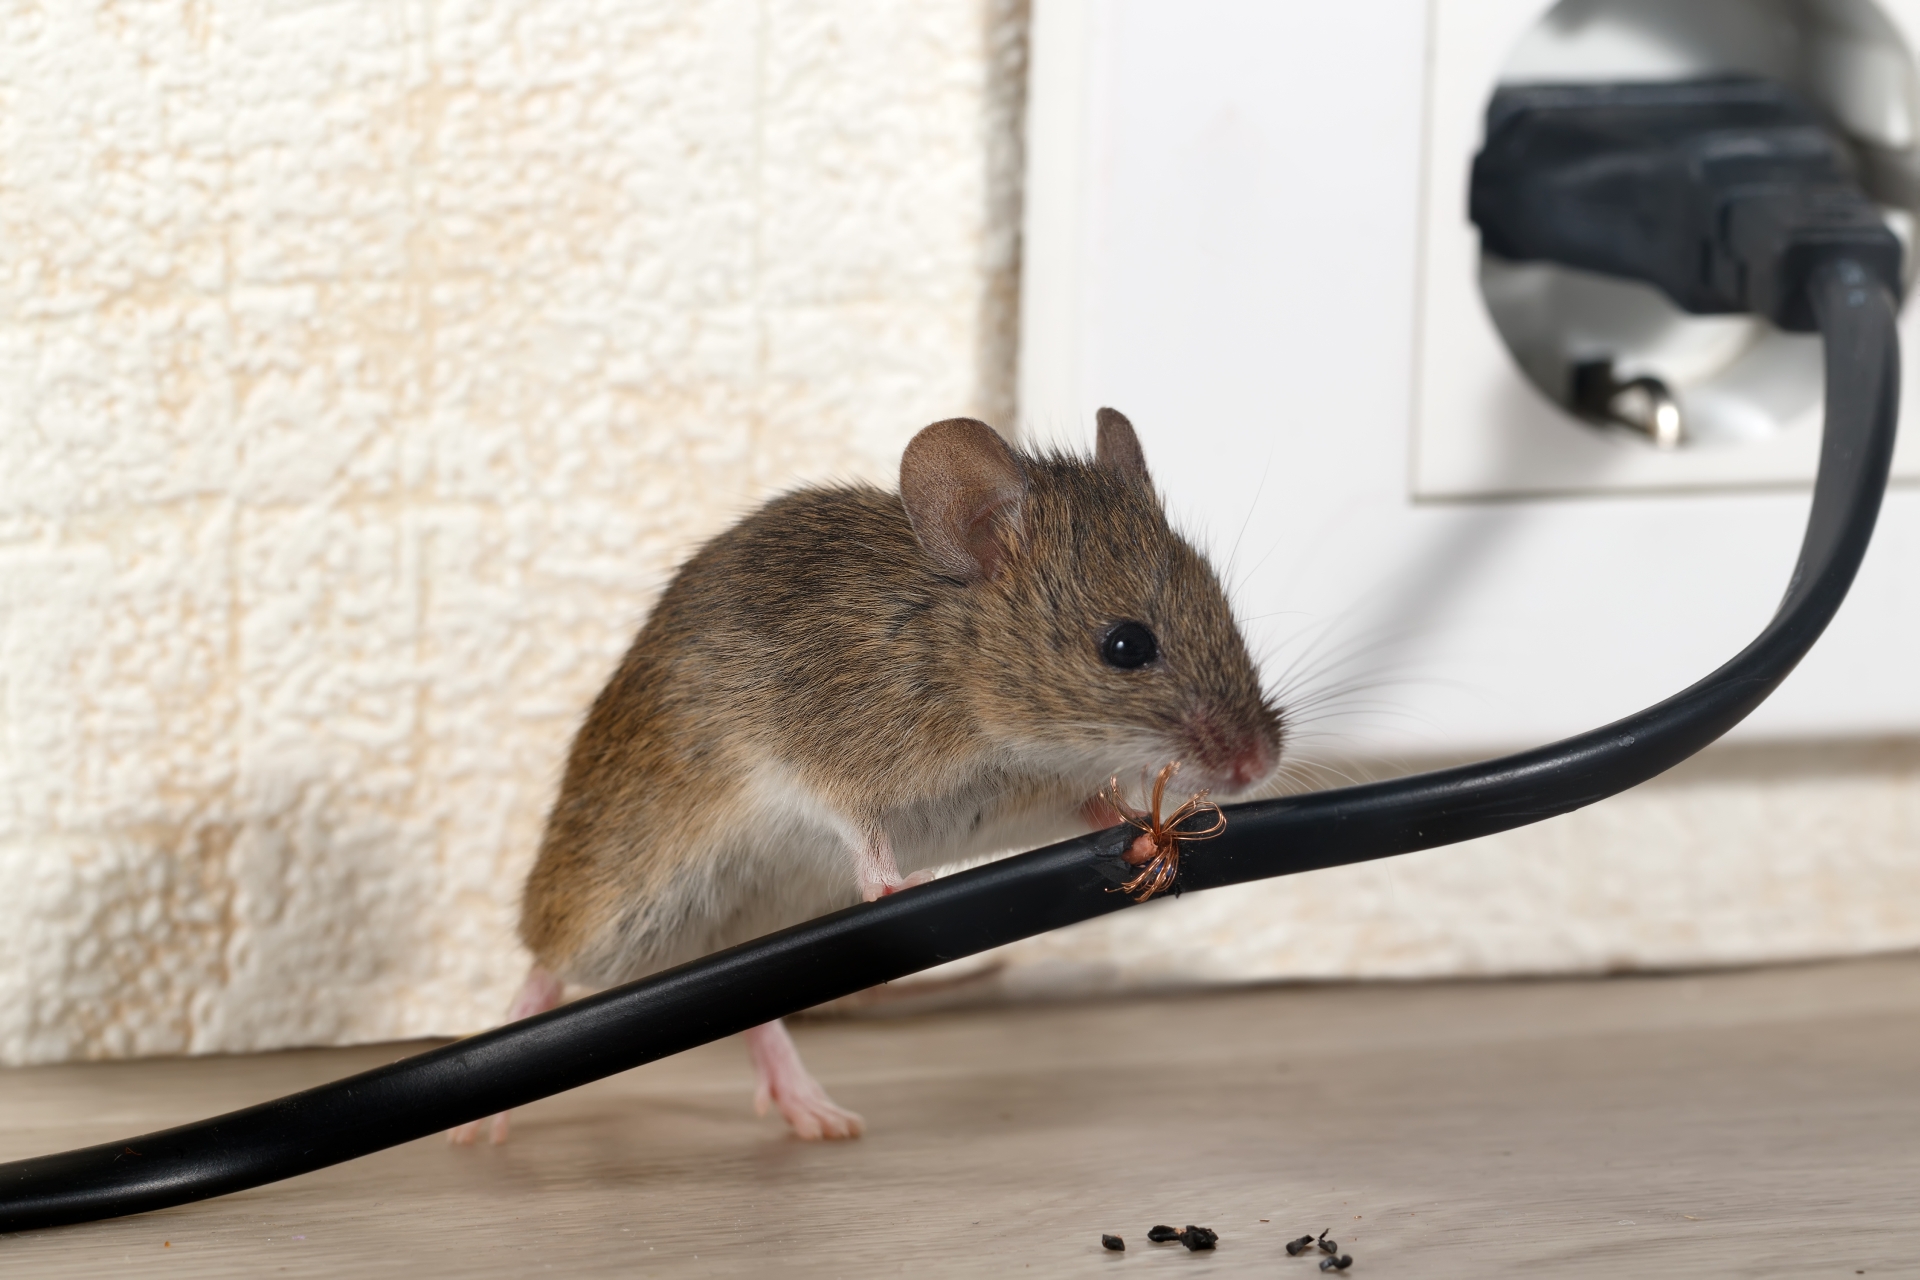 Mice Infestation, Pest Control in Stratford, West Ham, E15. Call Now 020 8166 9746